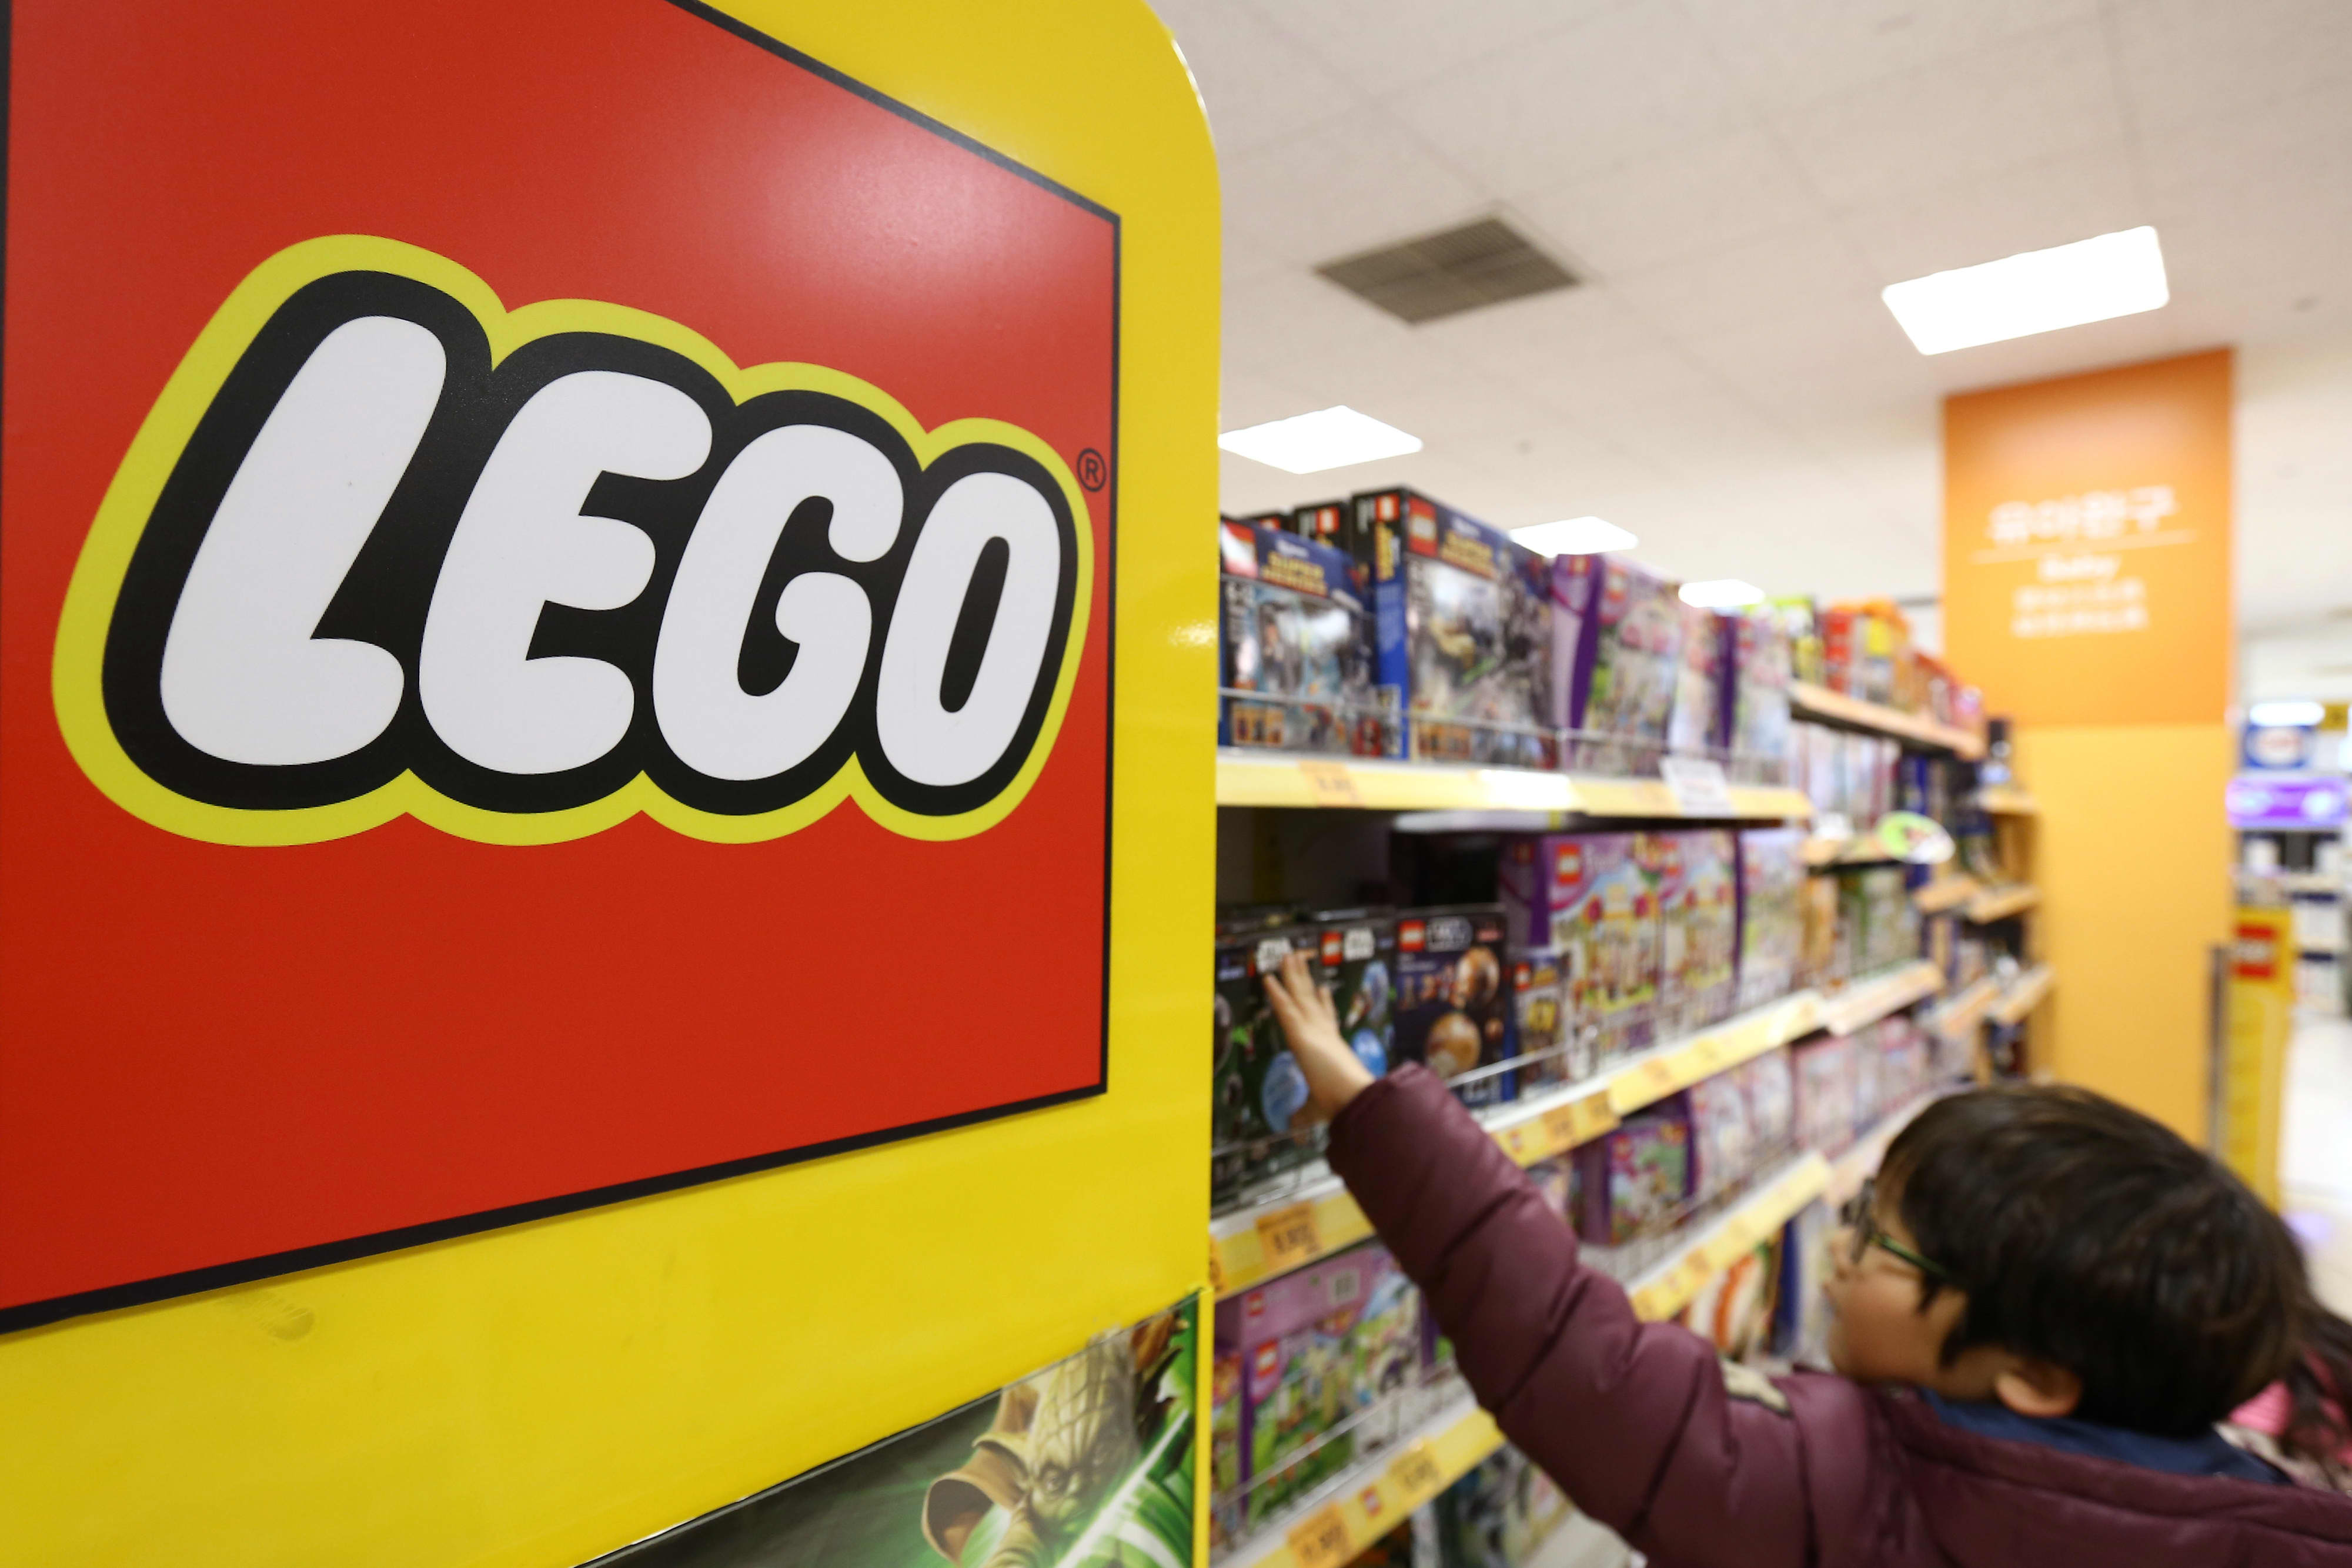 Lego sales increased in 2020, helped by e-commerce and growth in China